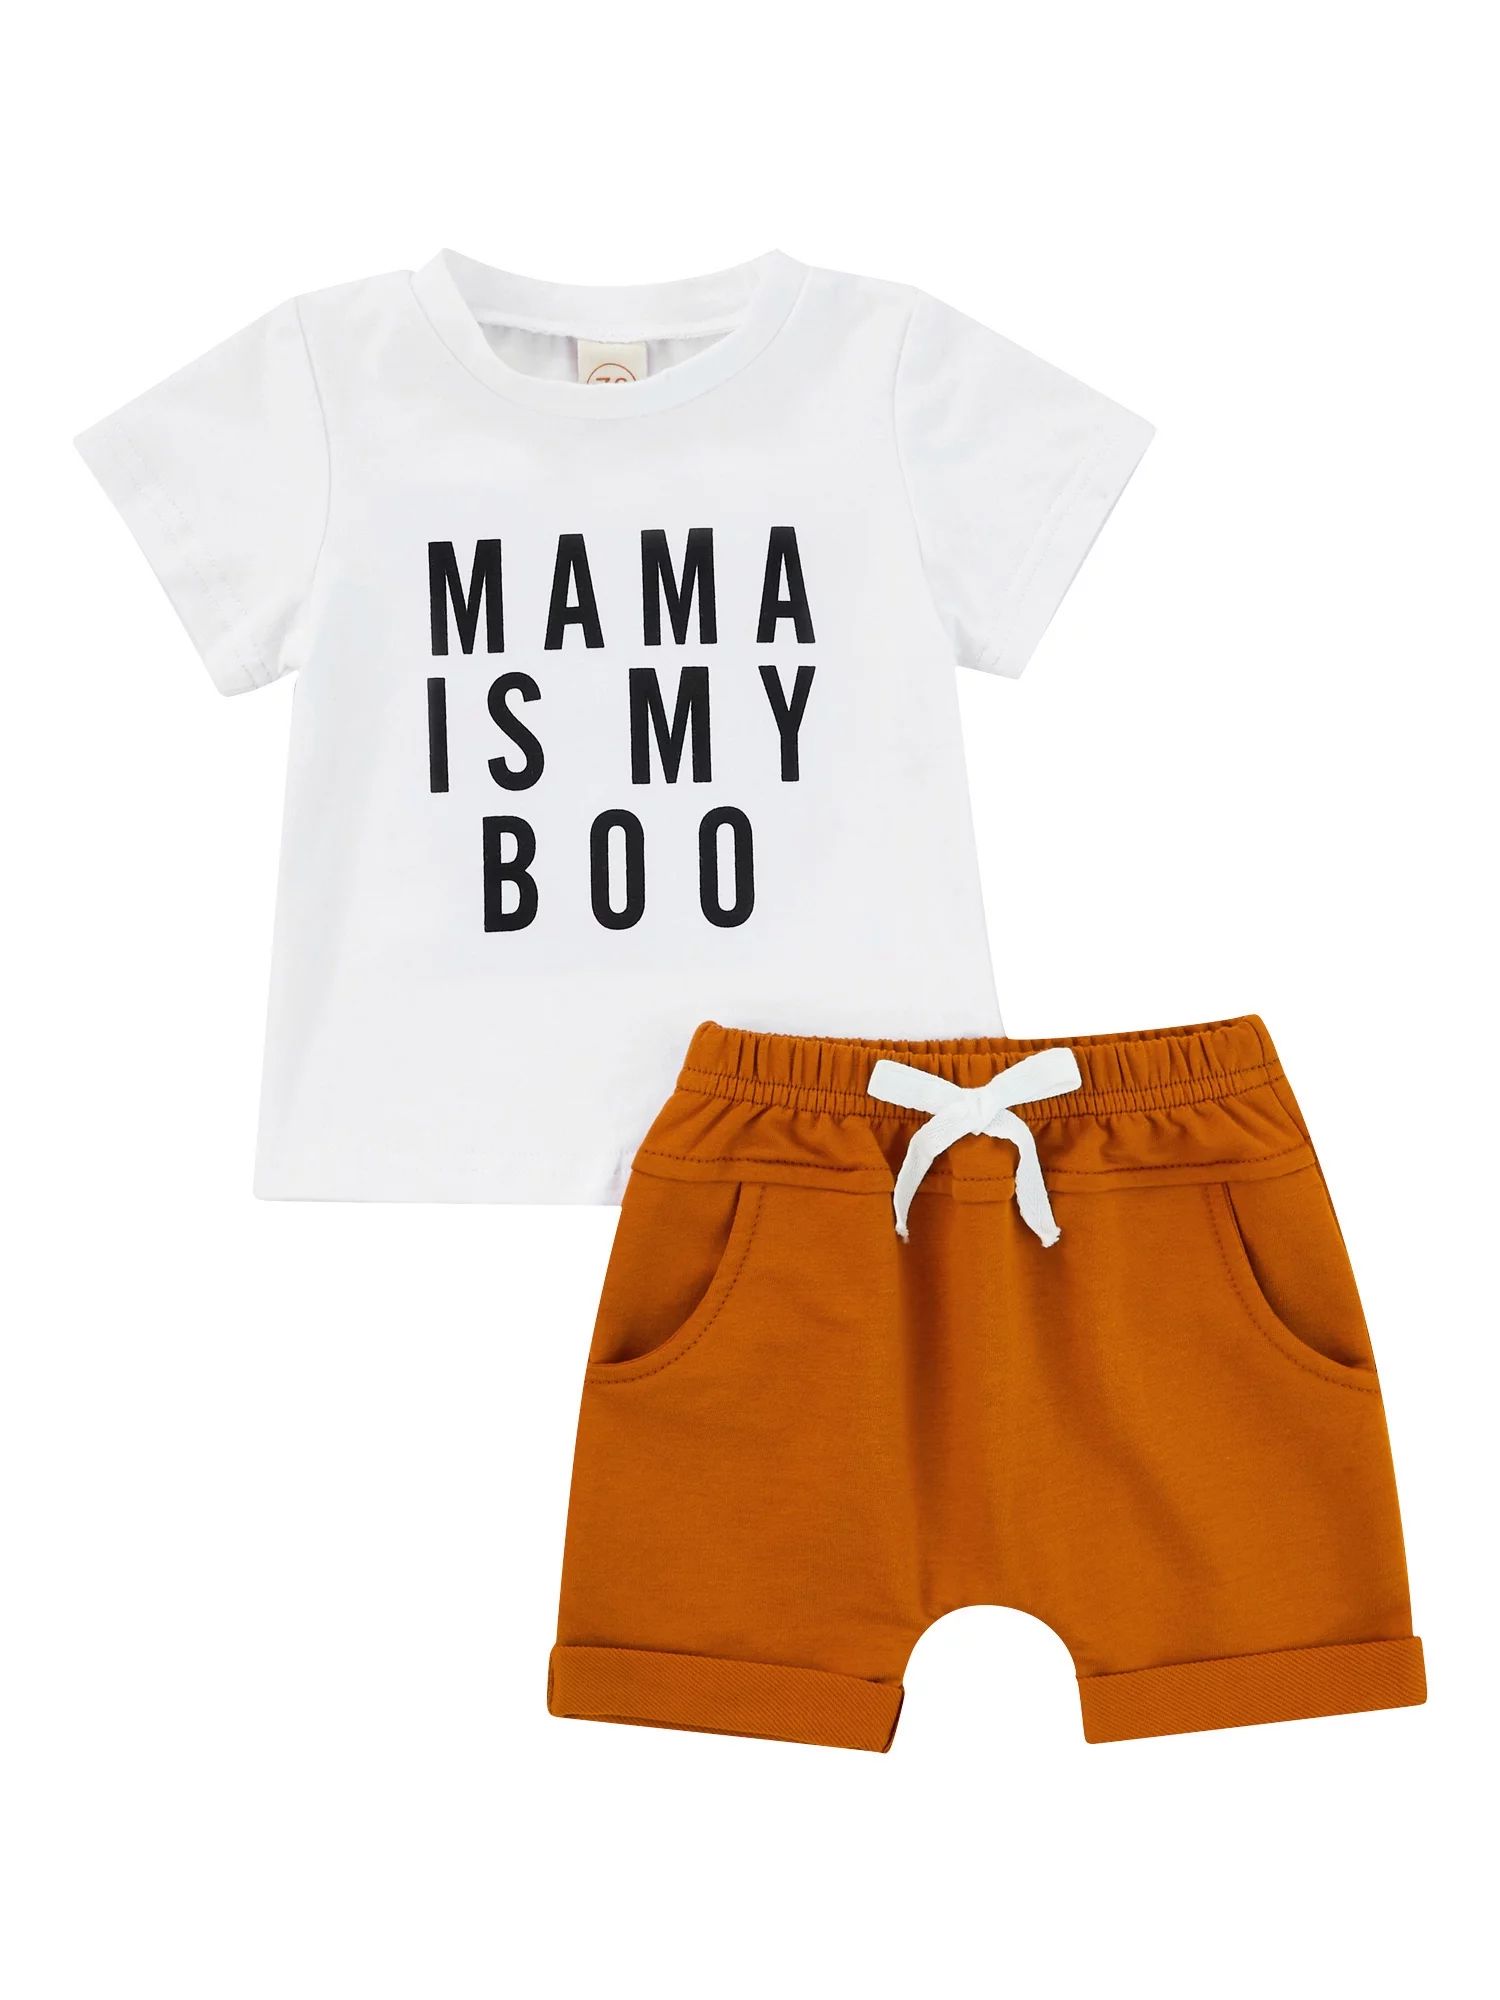 TheFound 2pcs Infant Baby Boys Causal Clothes MAMA IS MY BOO Short Sleeve T Shirts+Elastic Solid ... | Walmart (US)